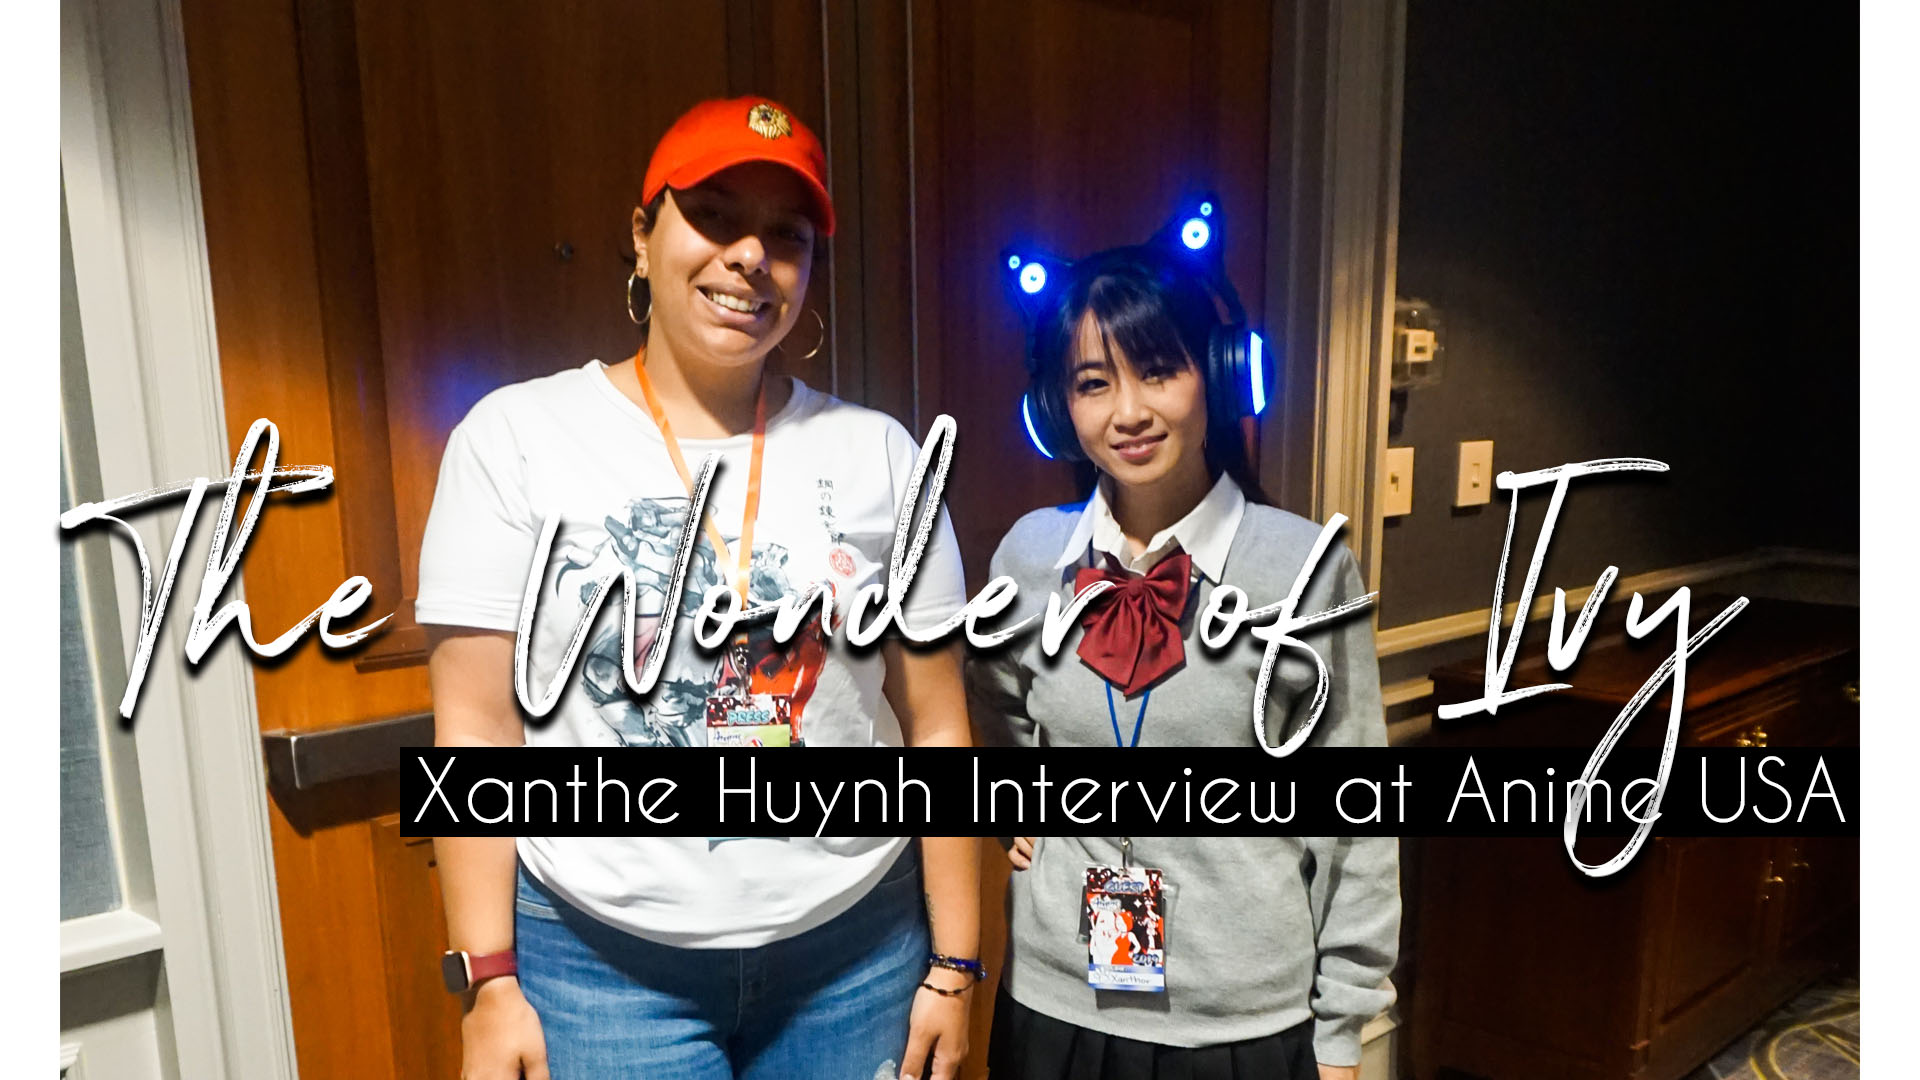 Xanthe Huynh Interview at Anime USA 2019 | TWOI